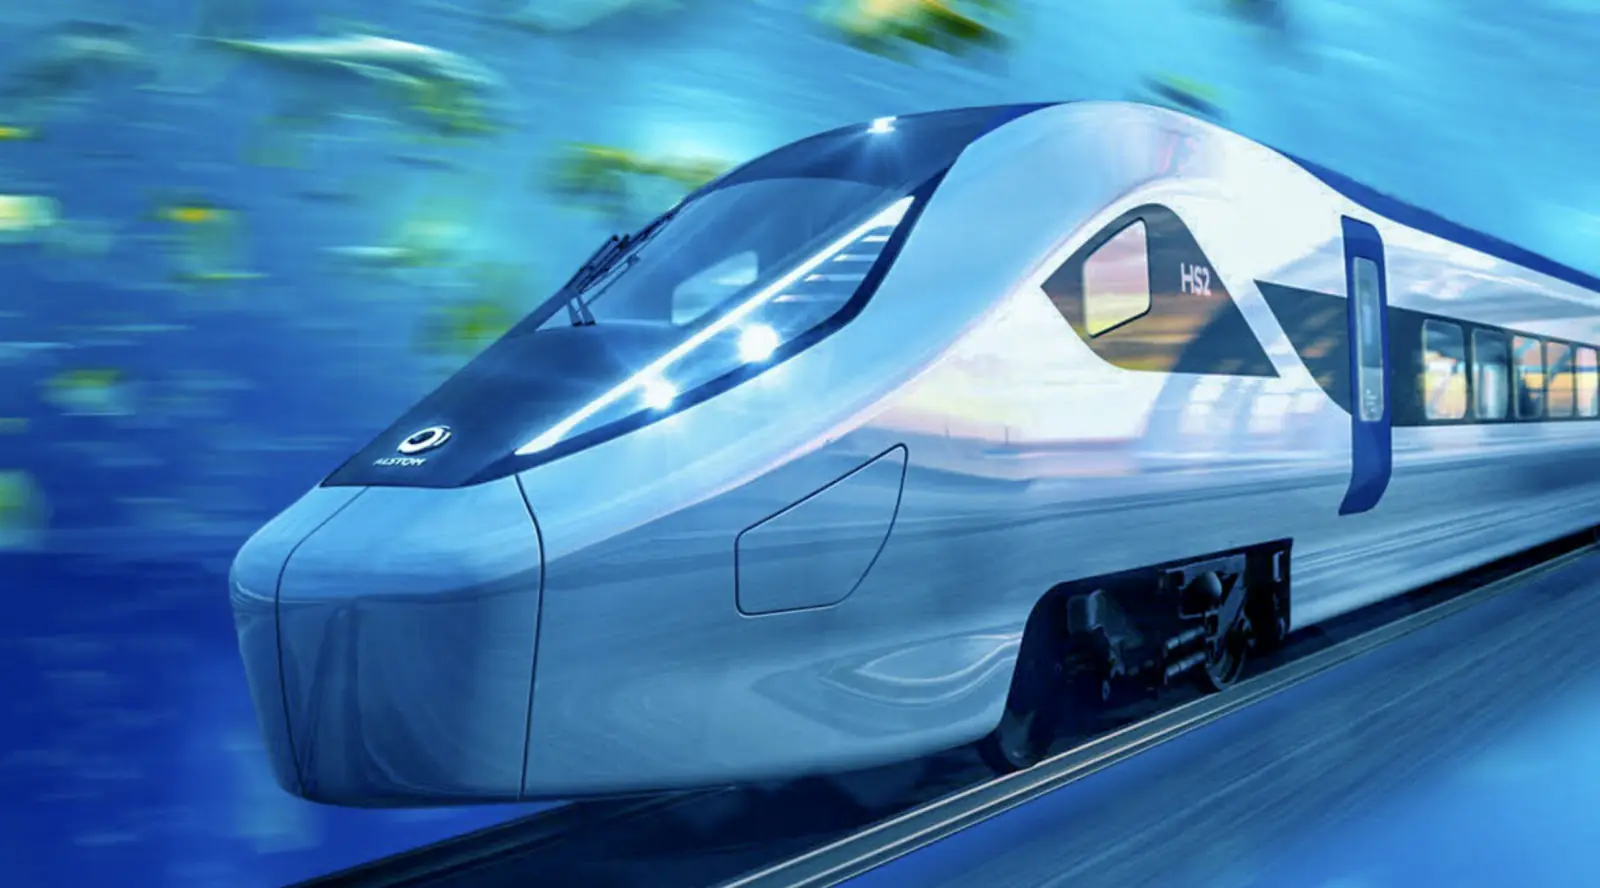 Tunnel built in Mumbai will speed up the work of Bullet Train, preparations are underway to run it from the year 2026